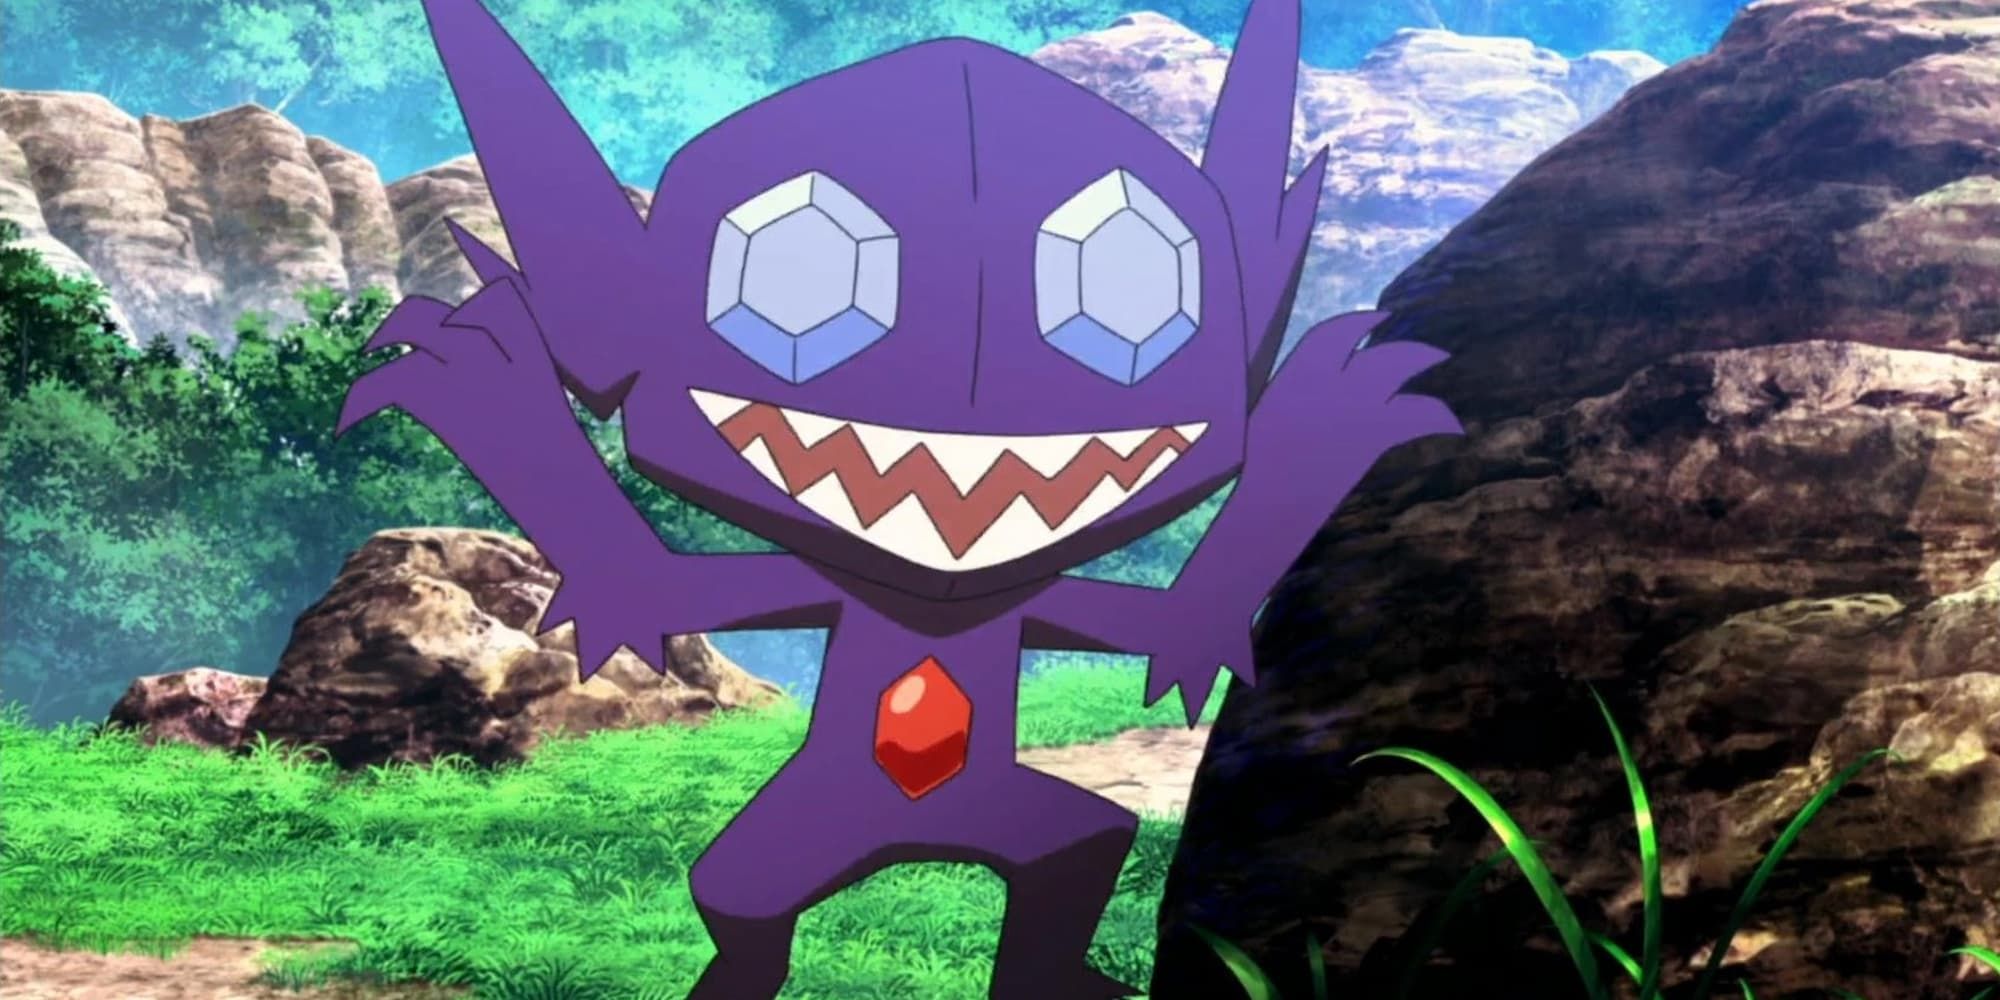 Sableye jumps out to startle someone from behind a rock in the Pokemon Anime.